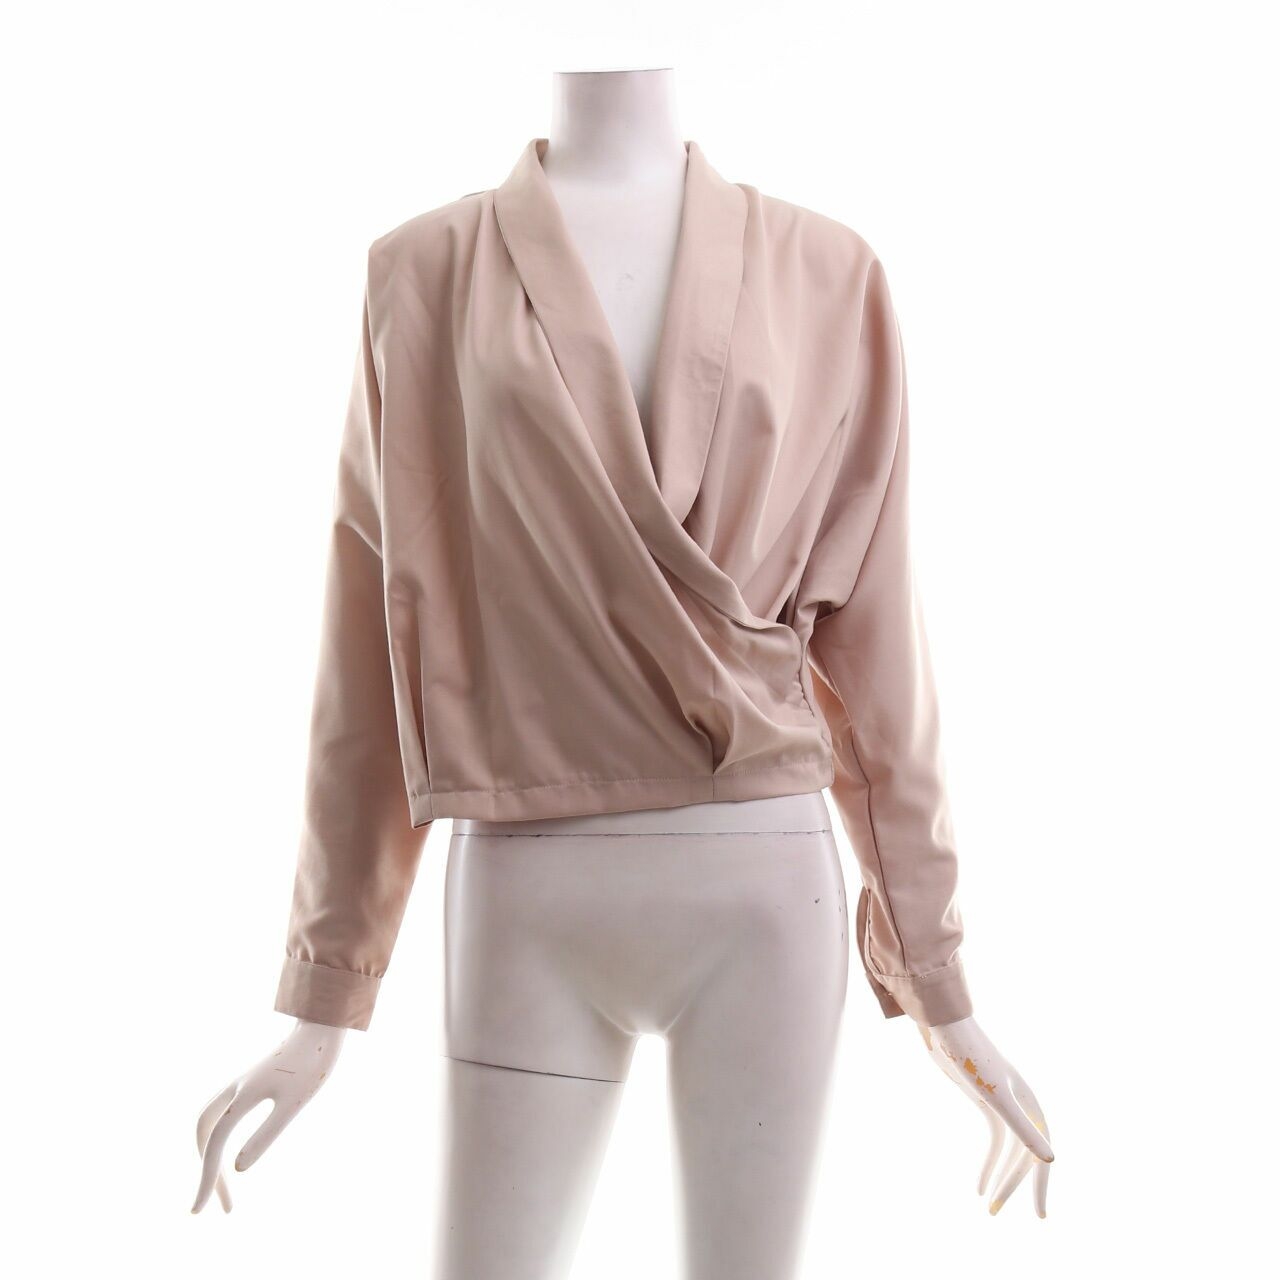 Veyl Nude Wrap Blouse